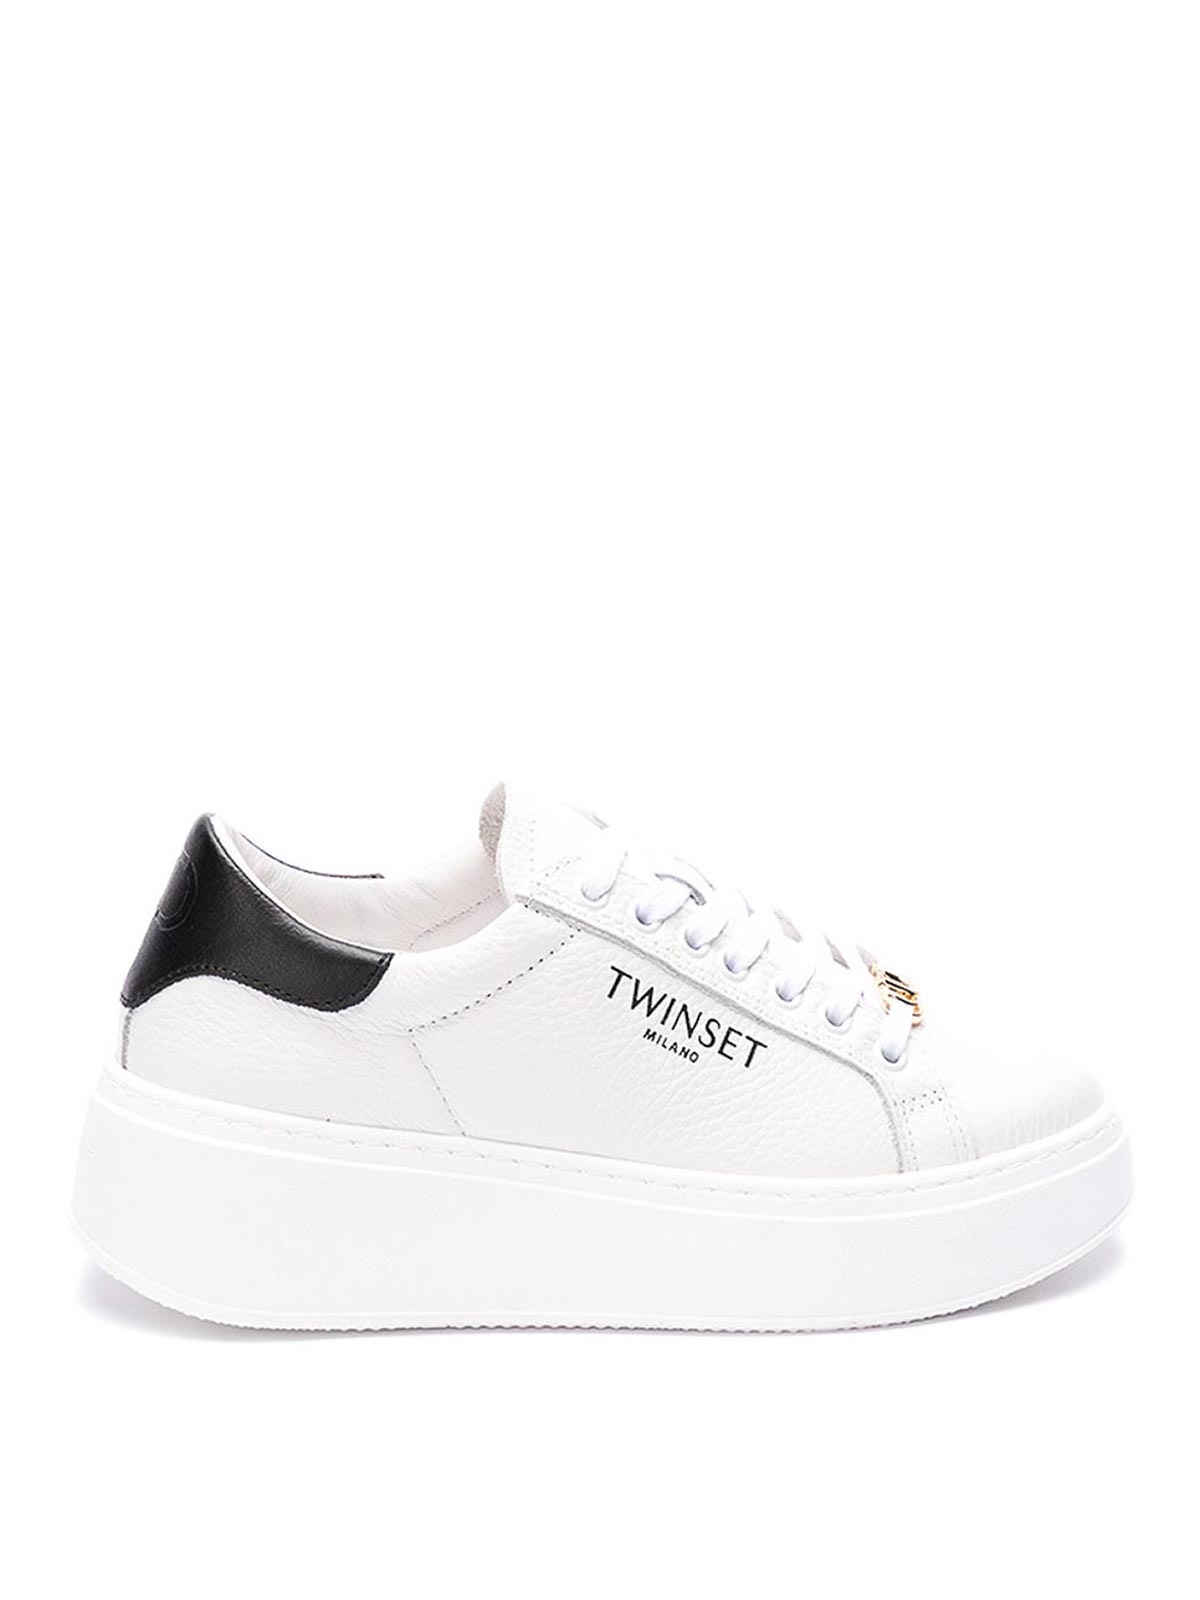 Twinset Low-top Sneakers In White